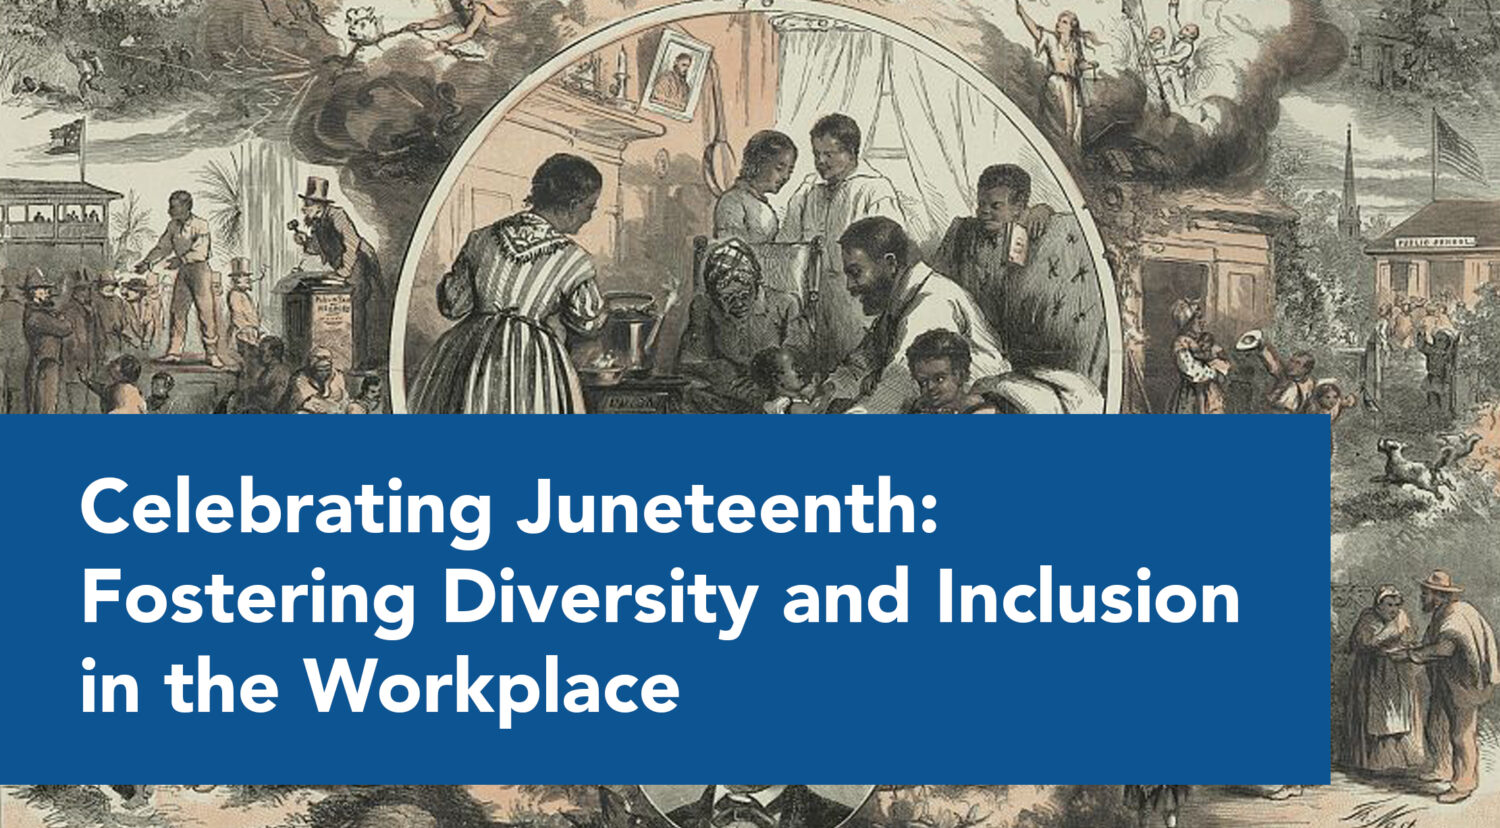 Blog_Celebrating Juneteenth: Fostering Diversity and Inclusion in the Workplace